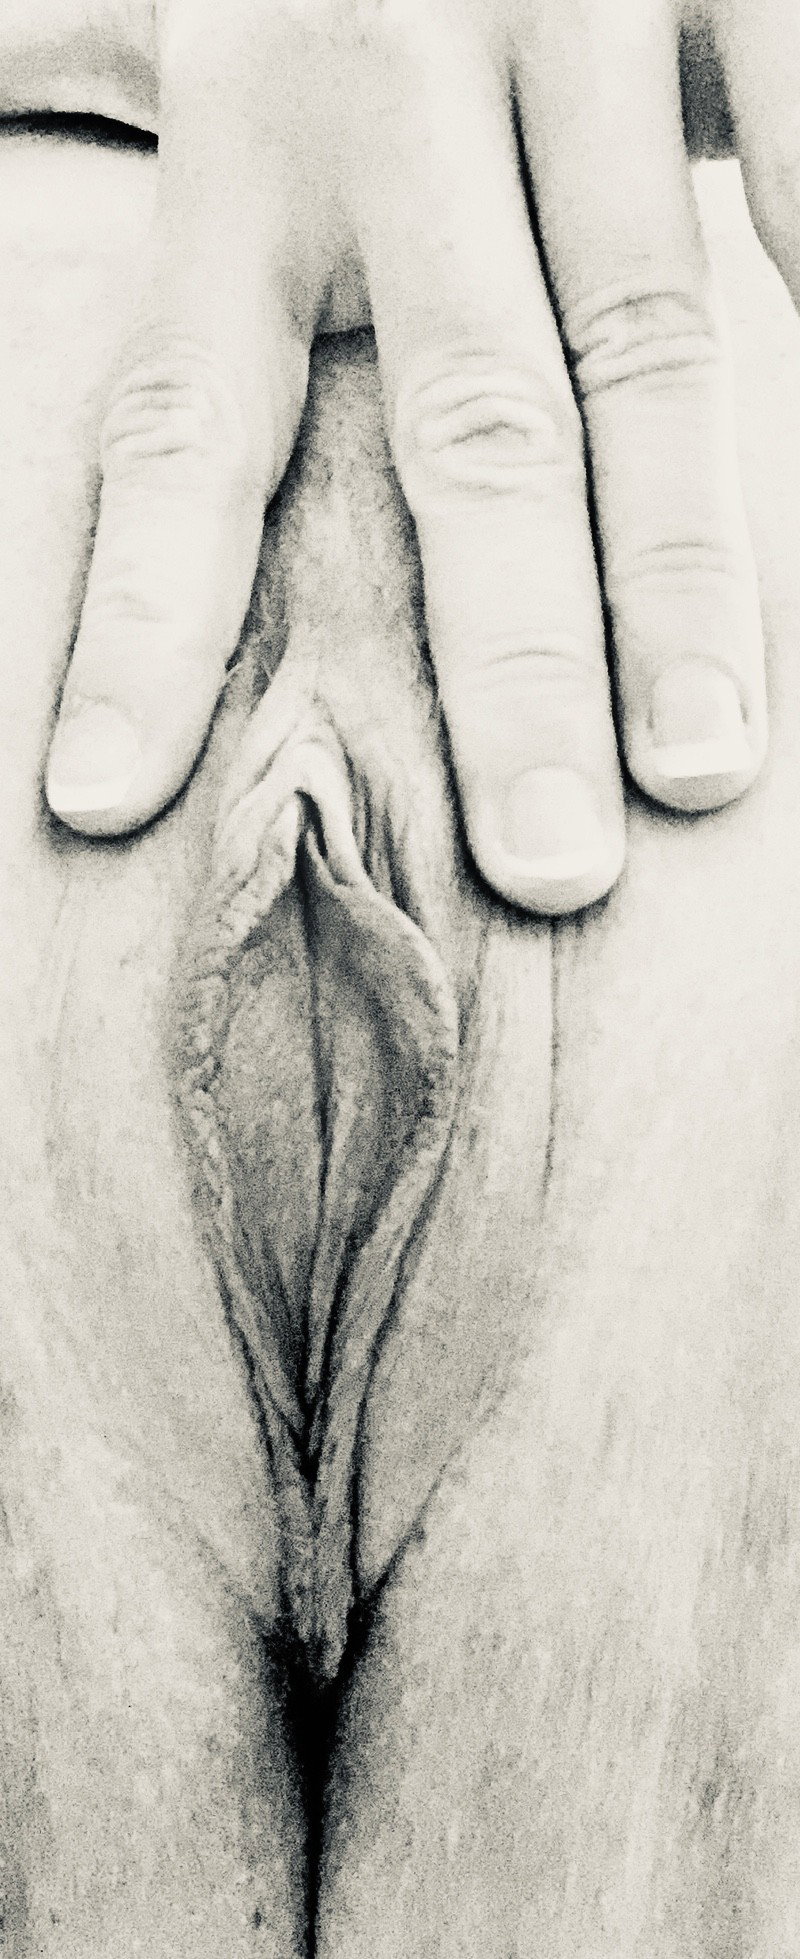 Watch the Photo by OneGentlemanOfVerona with the username @OneGentlemanOfVerona, posted on September 10, 2019. The post is about the topic Pussy.